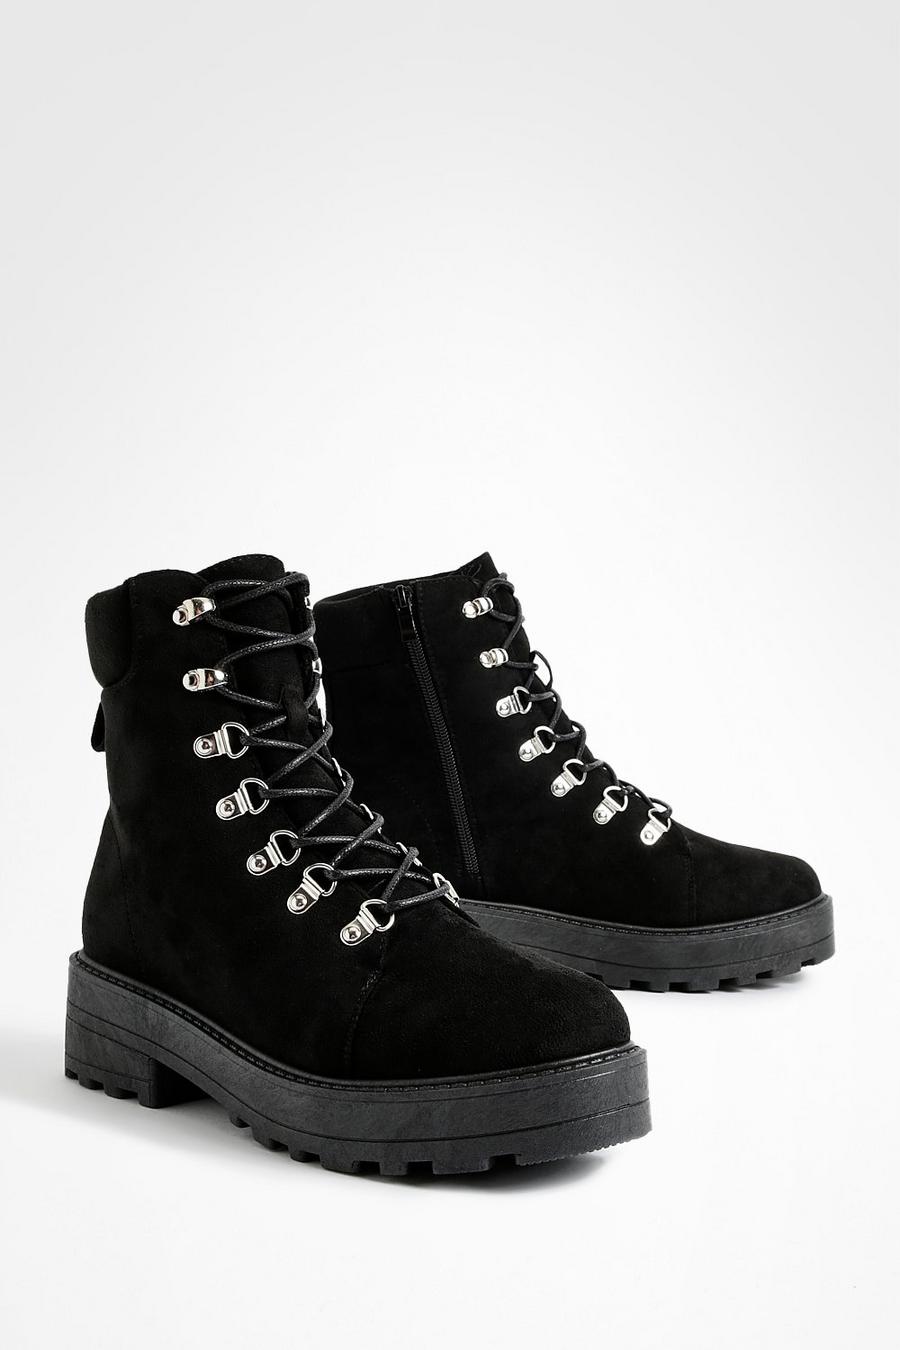 Black noir Wide Fit Eyelet Detail Lace Up Chunky Hiker Boots